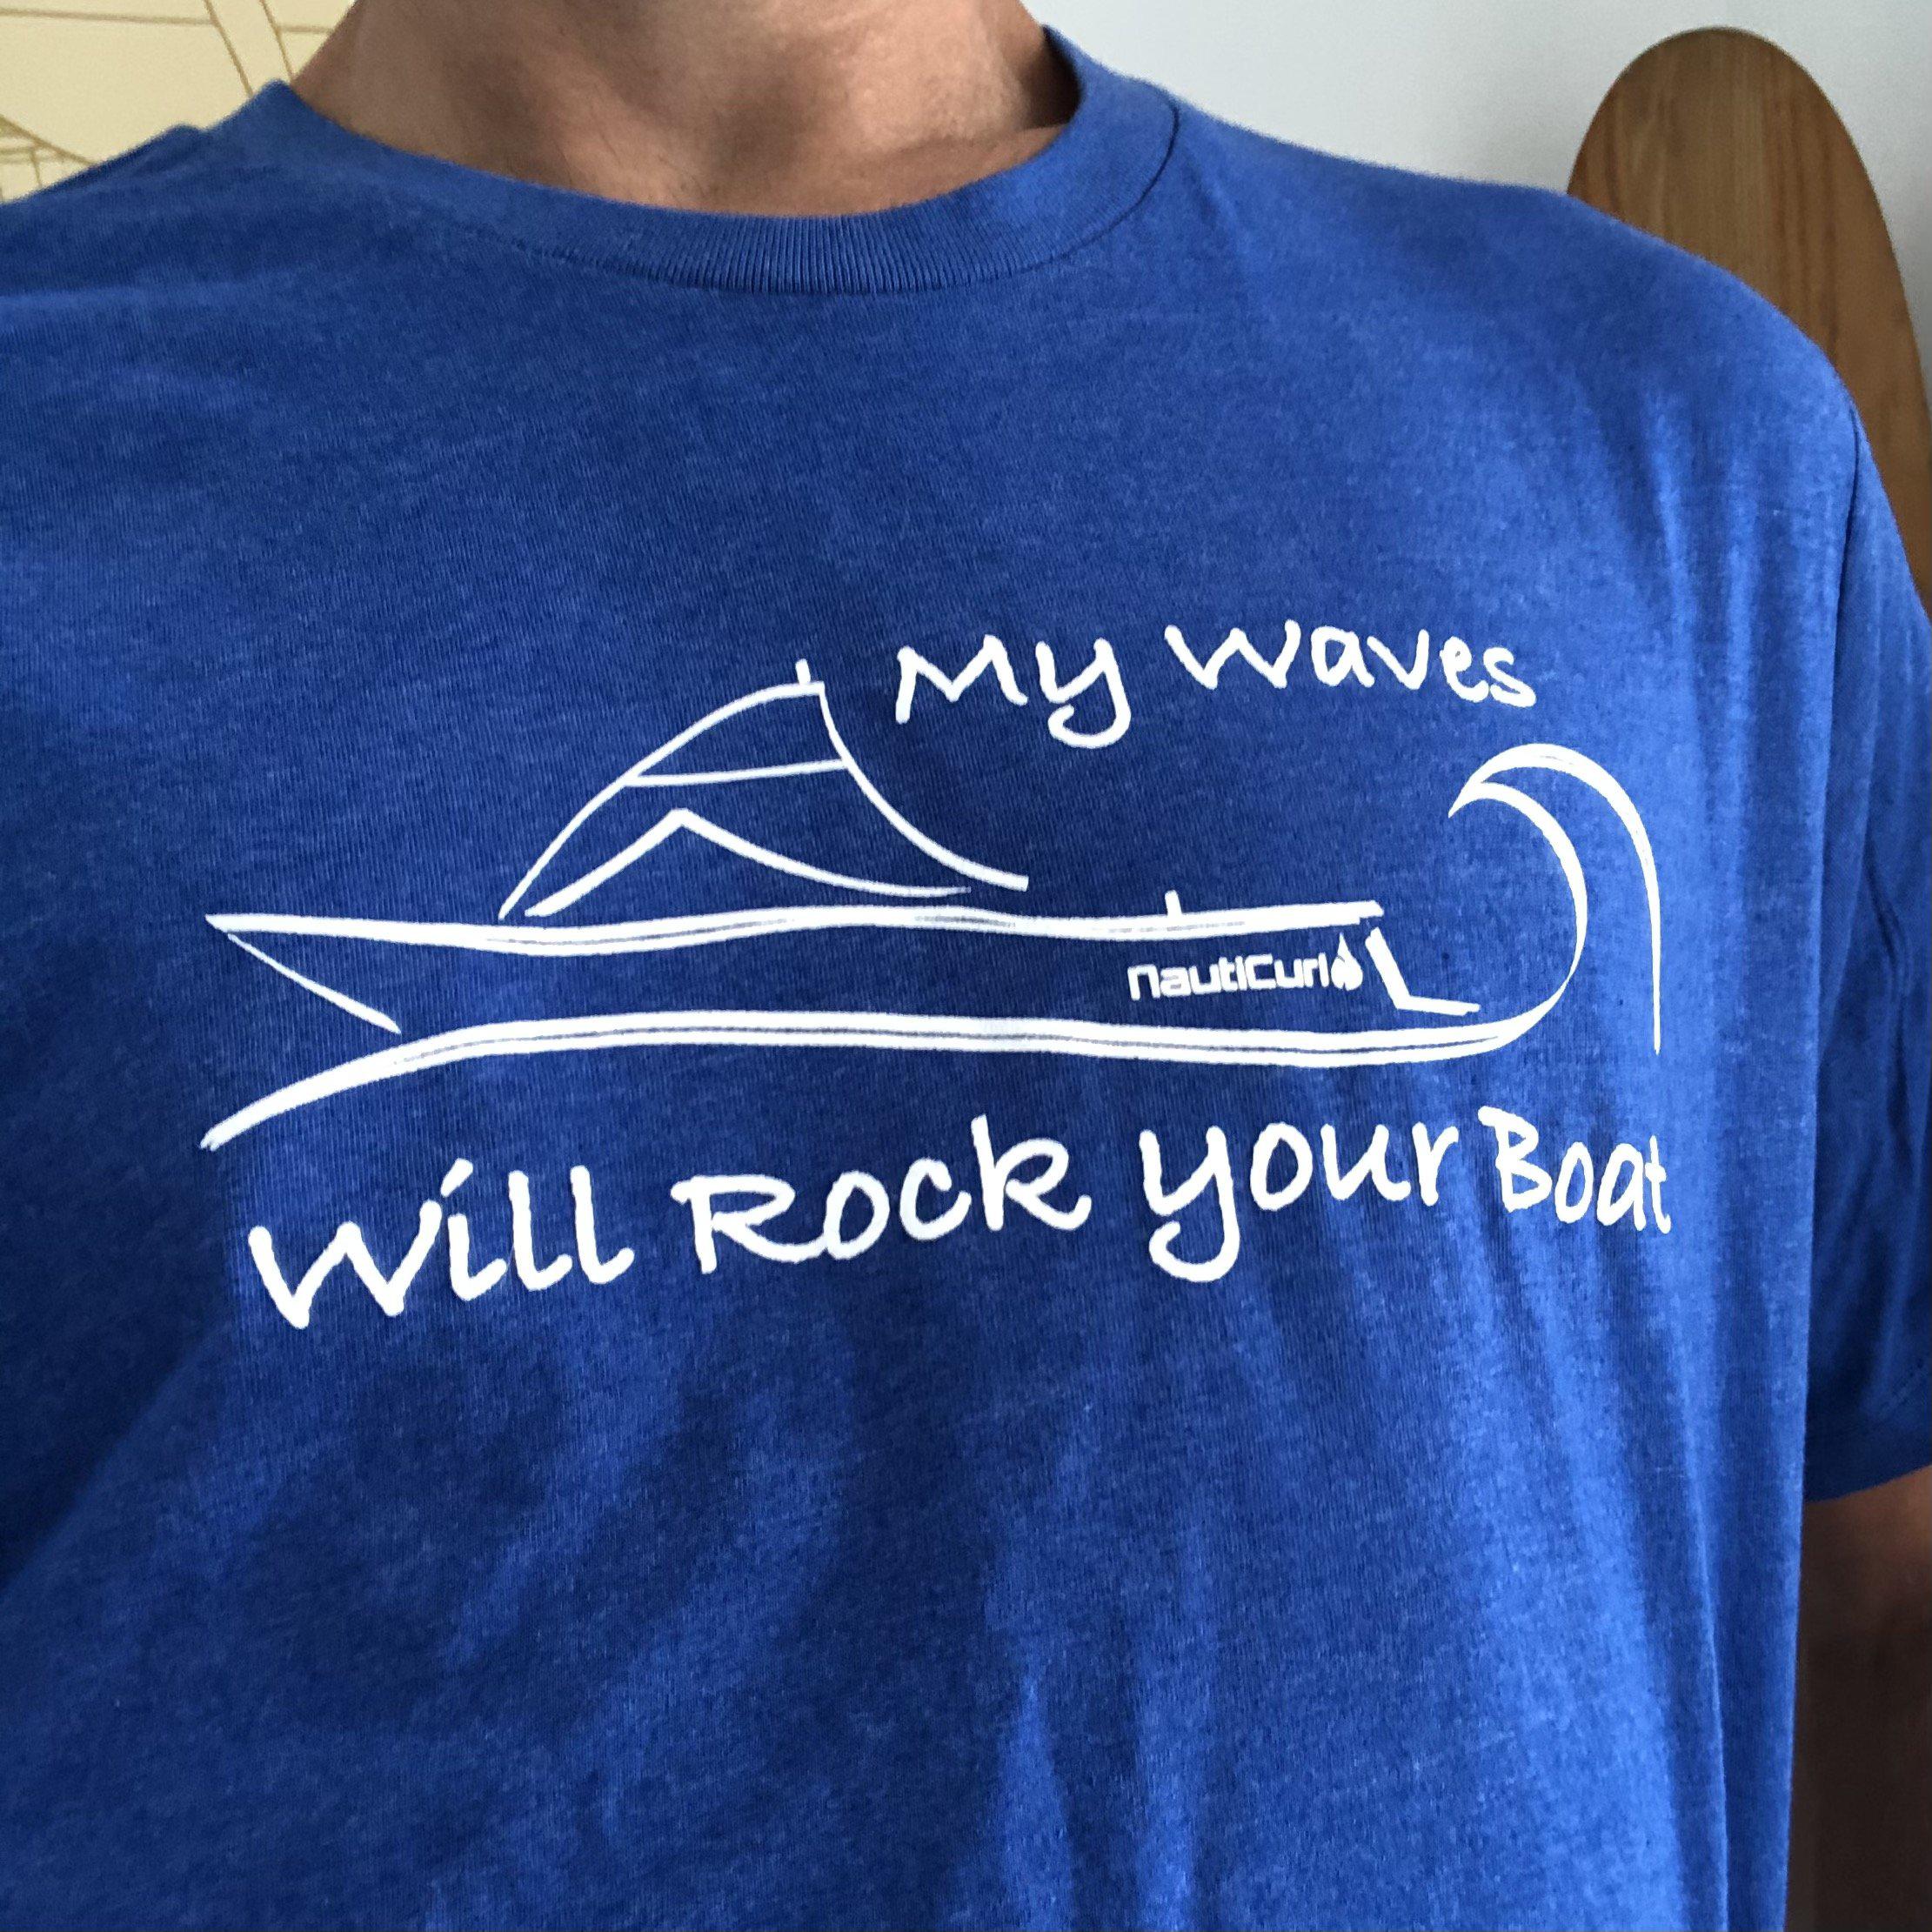 Funny Boating Shirt - My Waves will Rock your Boat - NautiCurl